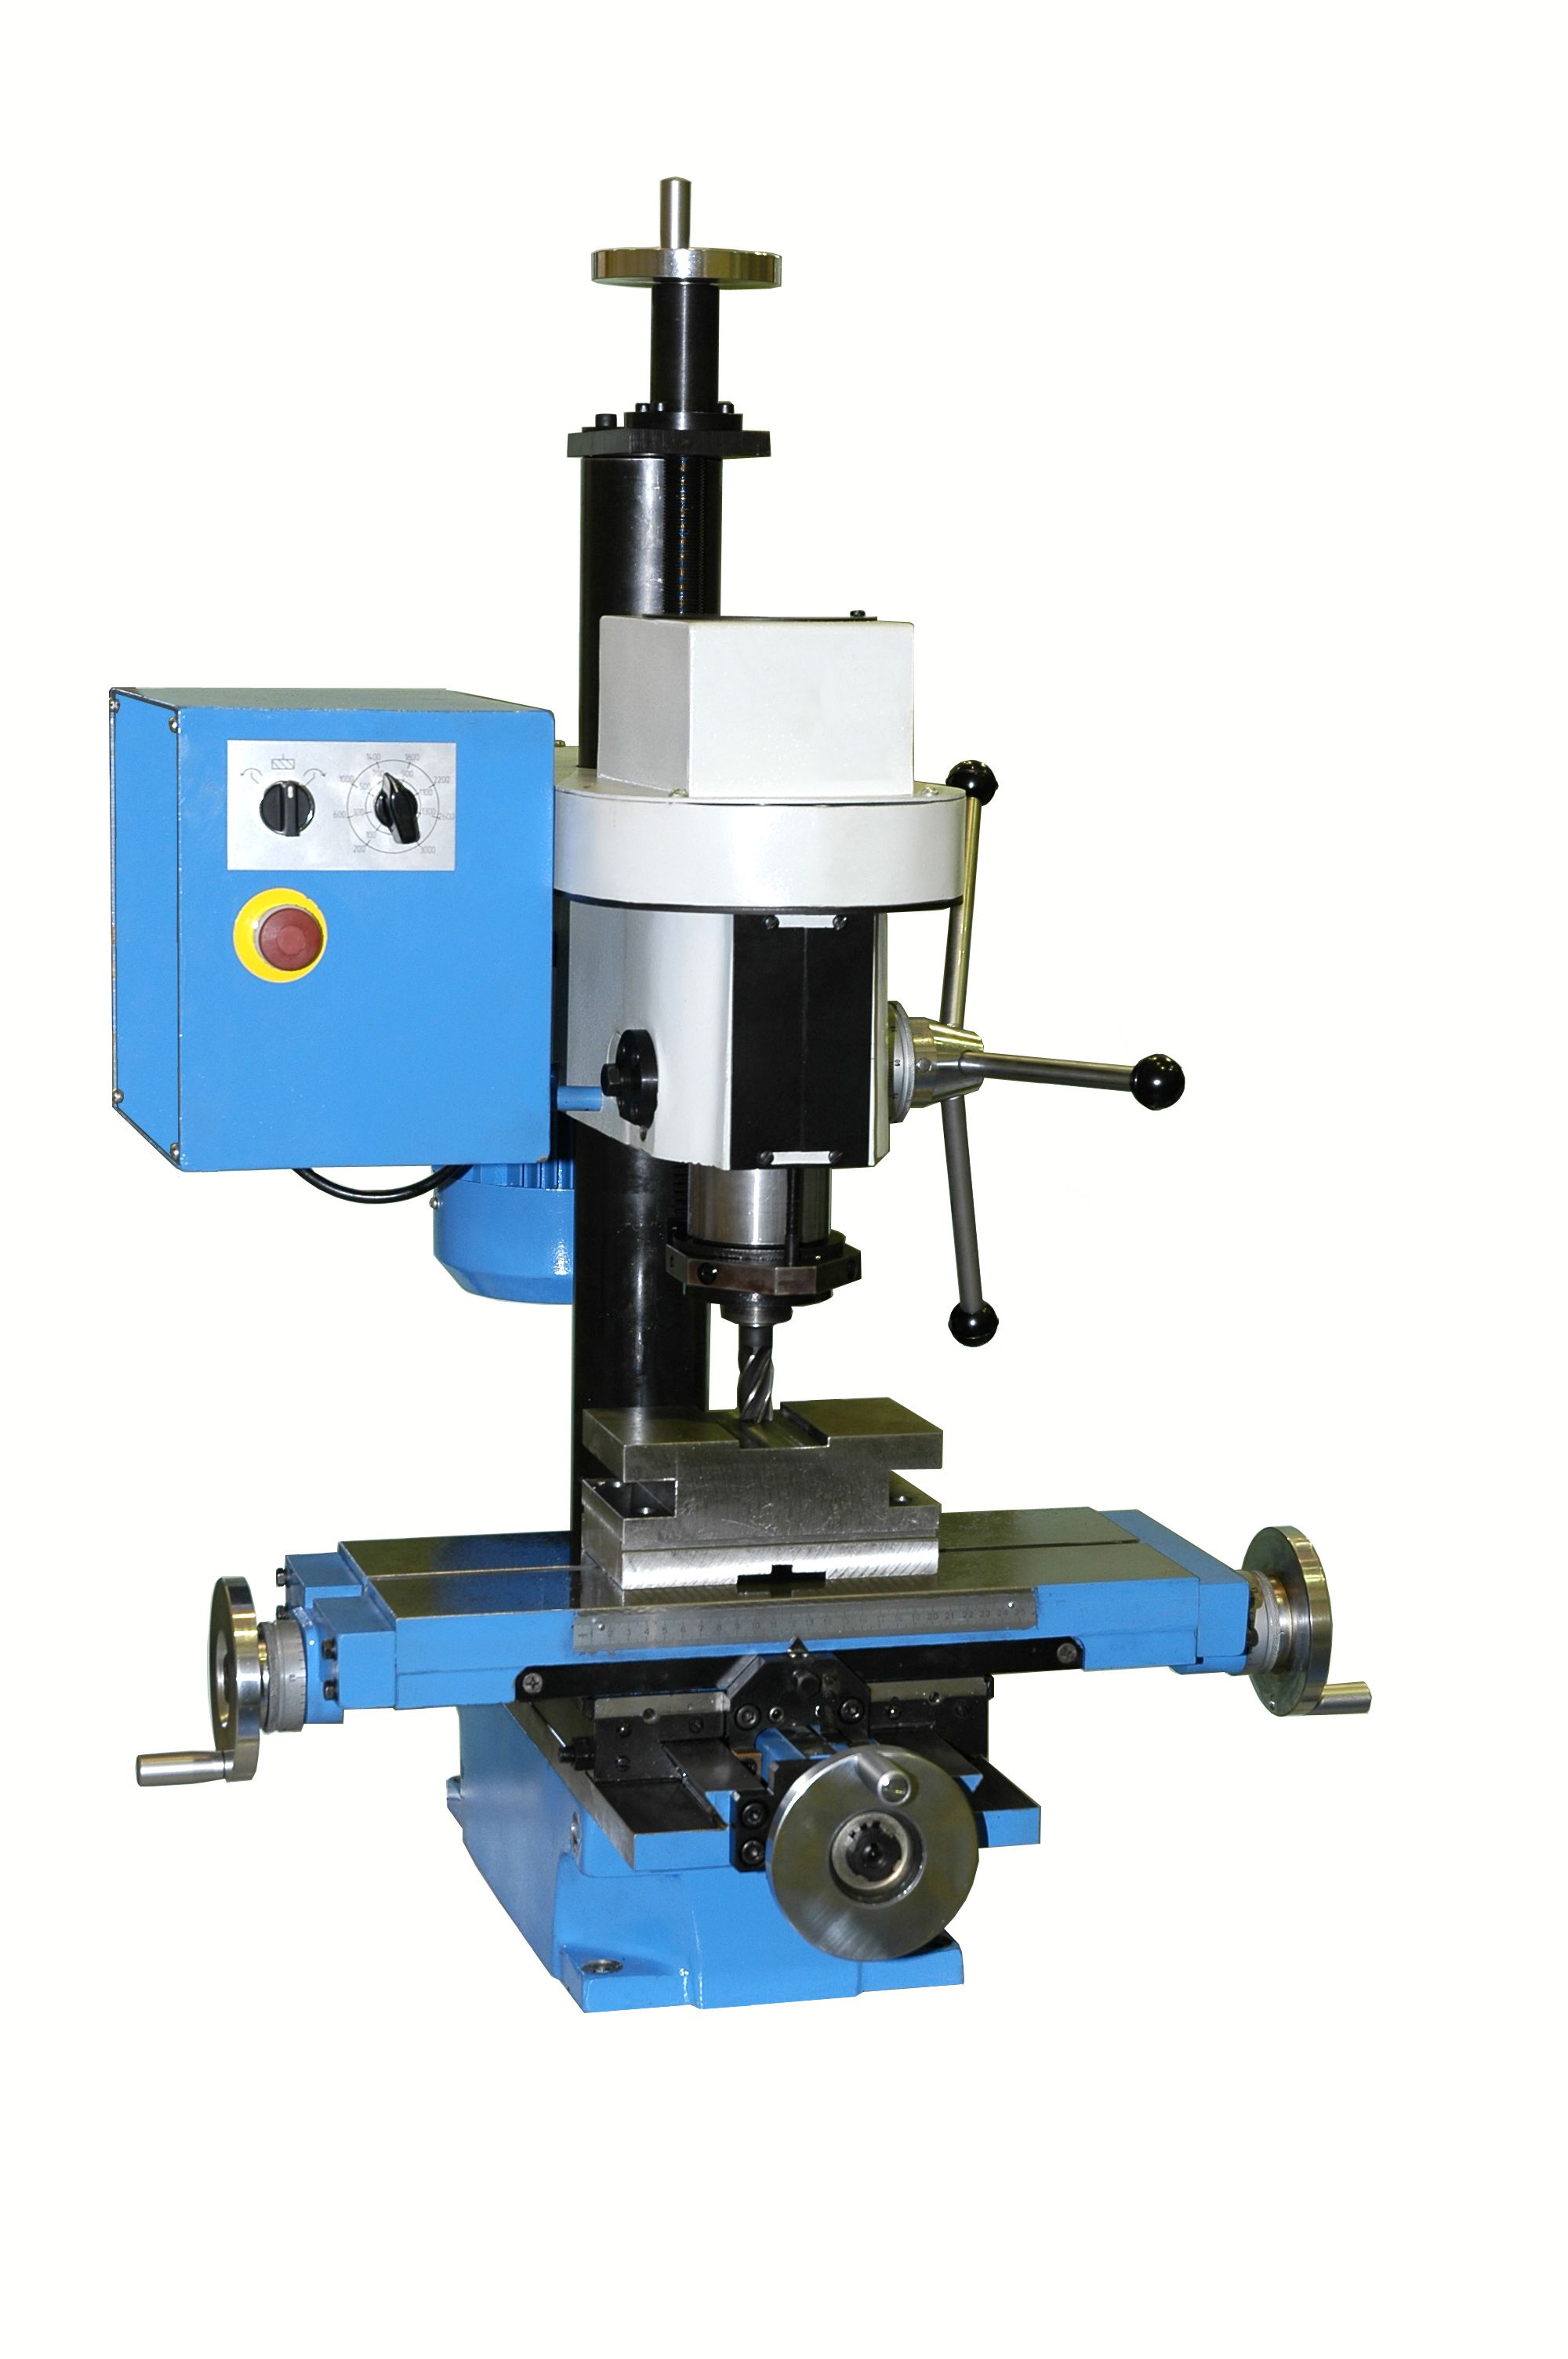 DRILLING – MILLING, DRILLING MACHINE